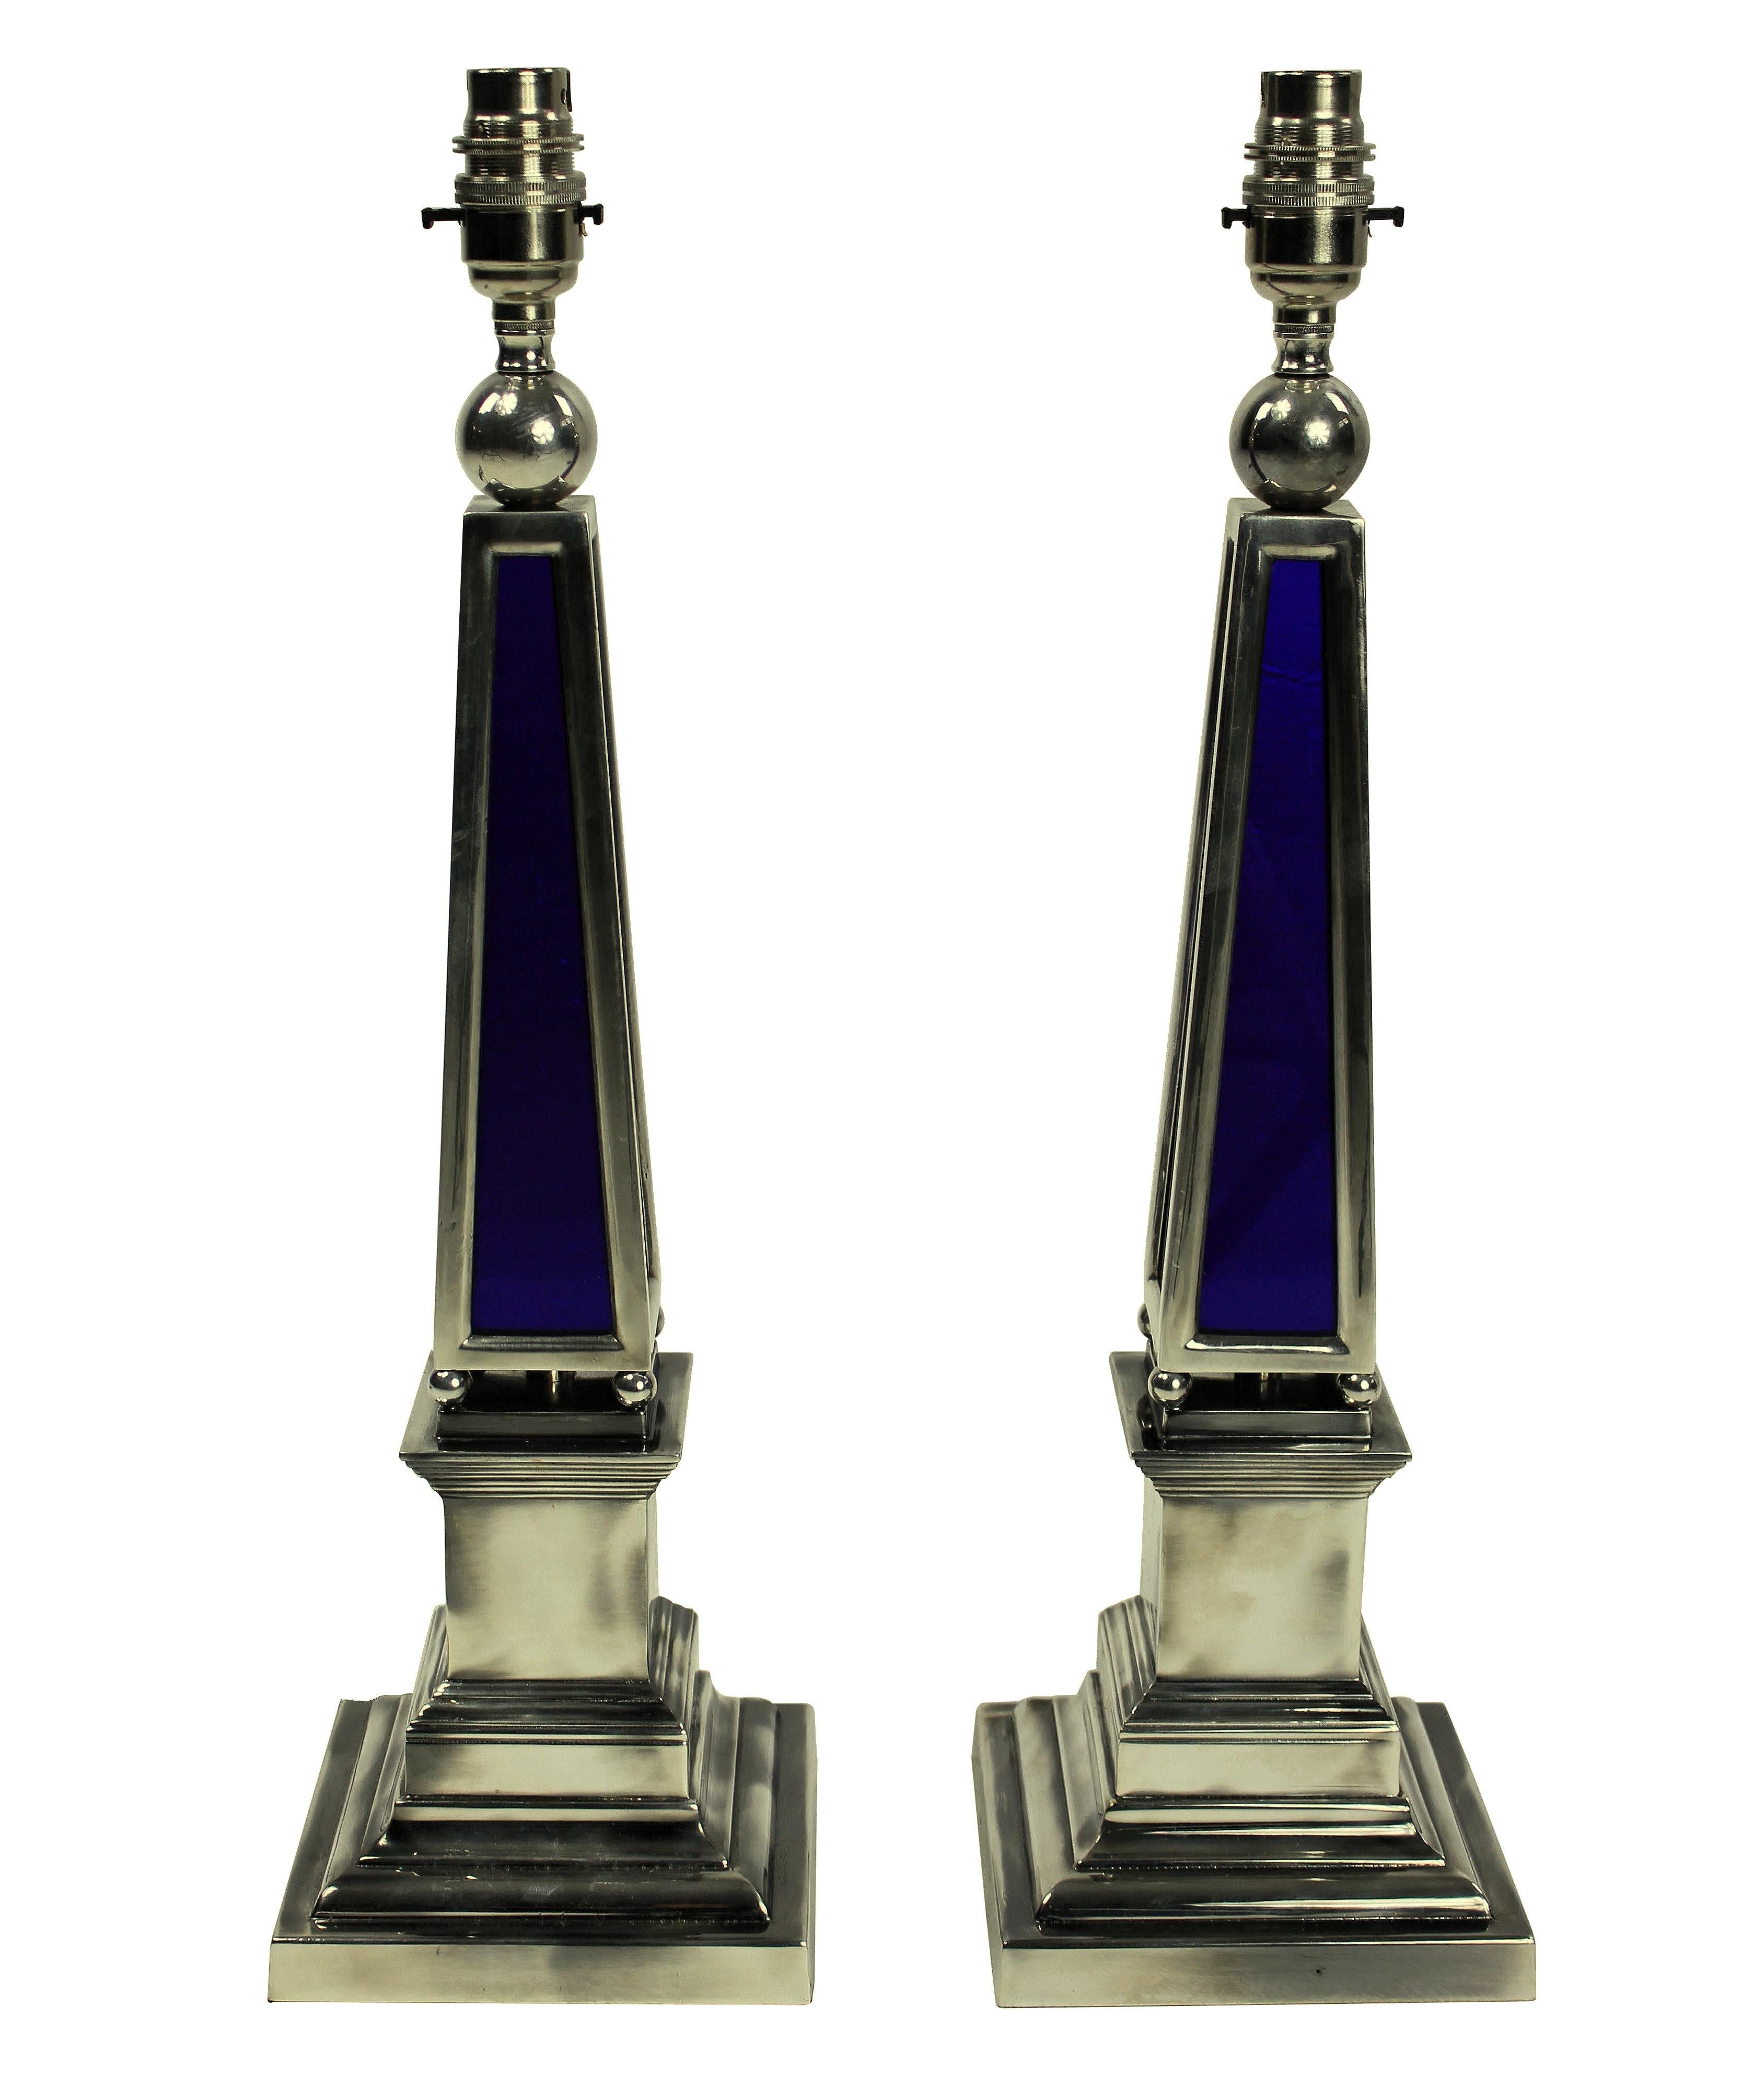 A pair of English silver plated obelisk lamps with blue glass panels.

These lamps are made to order for Ebury trading.

These items are subjected to VAT.